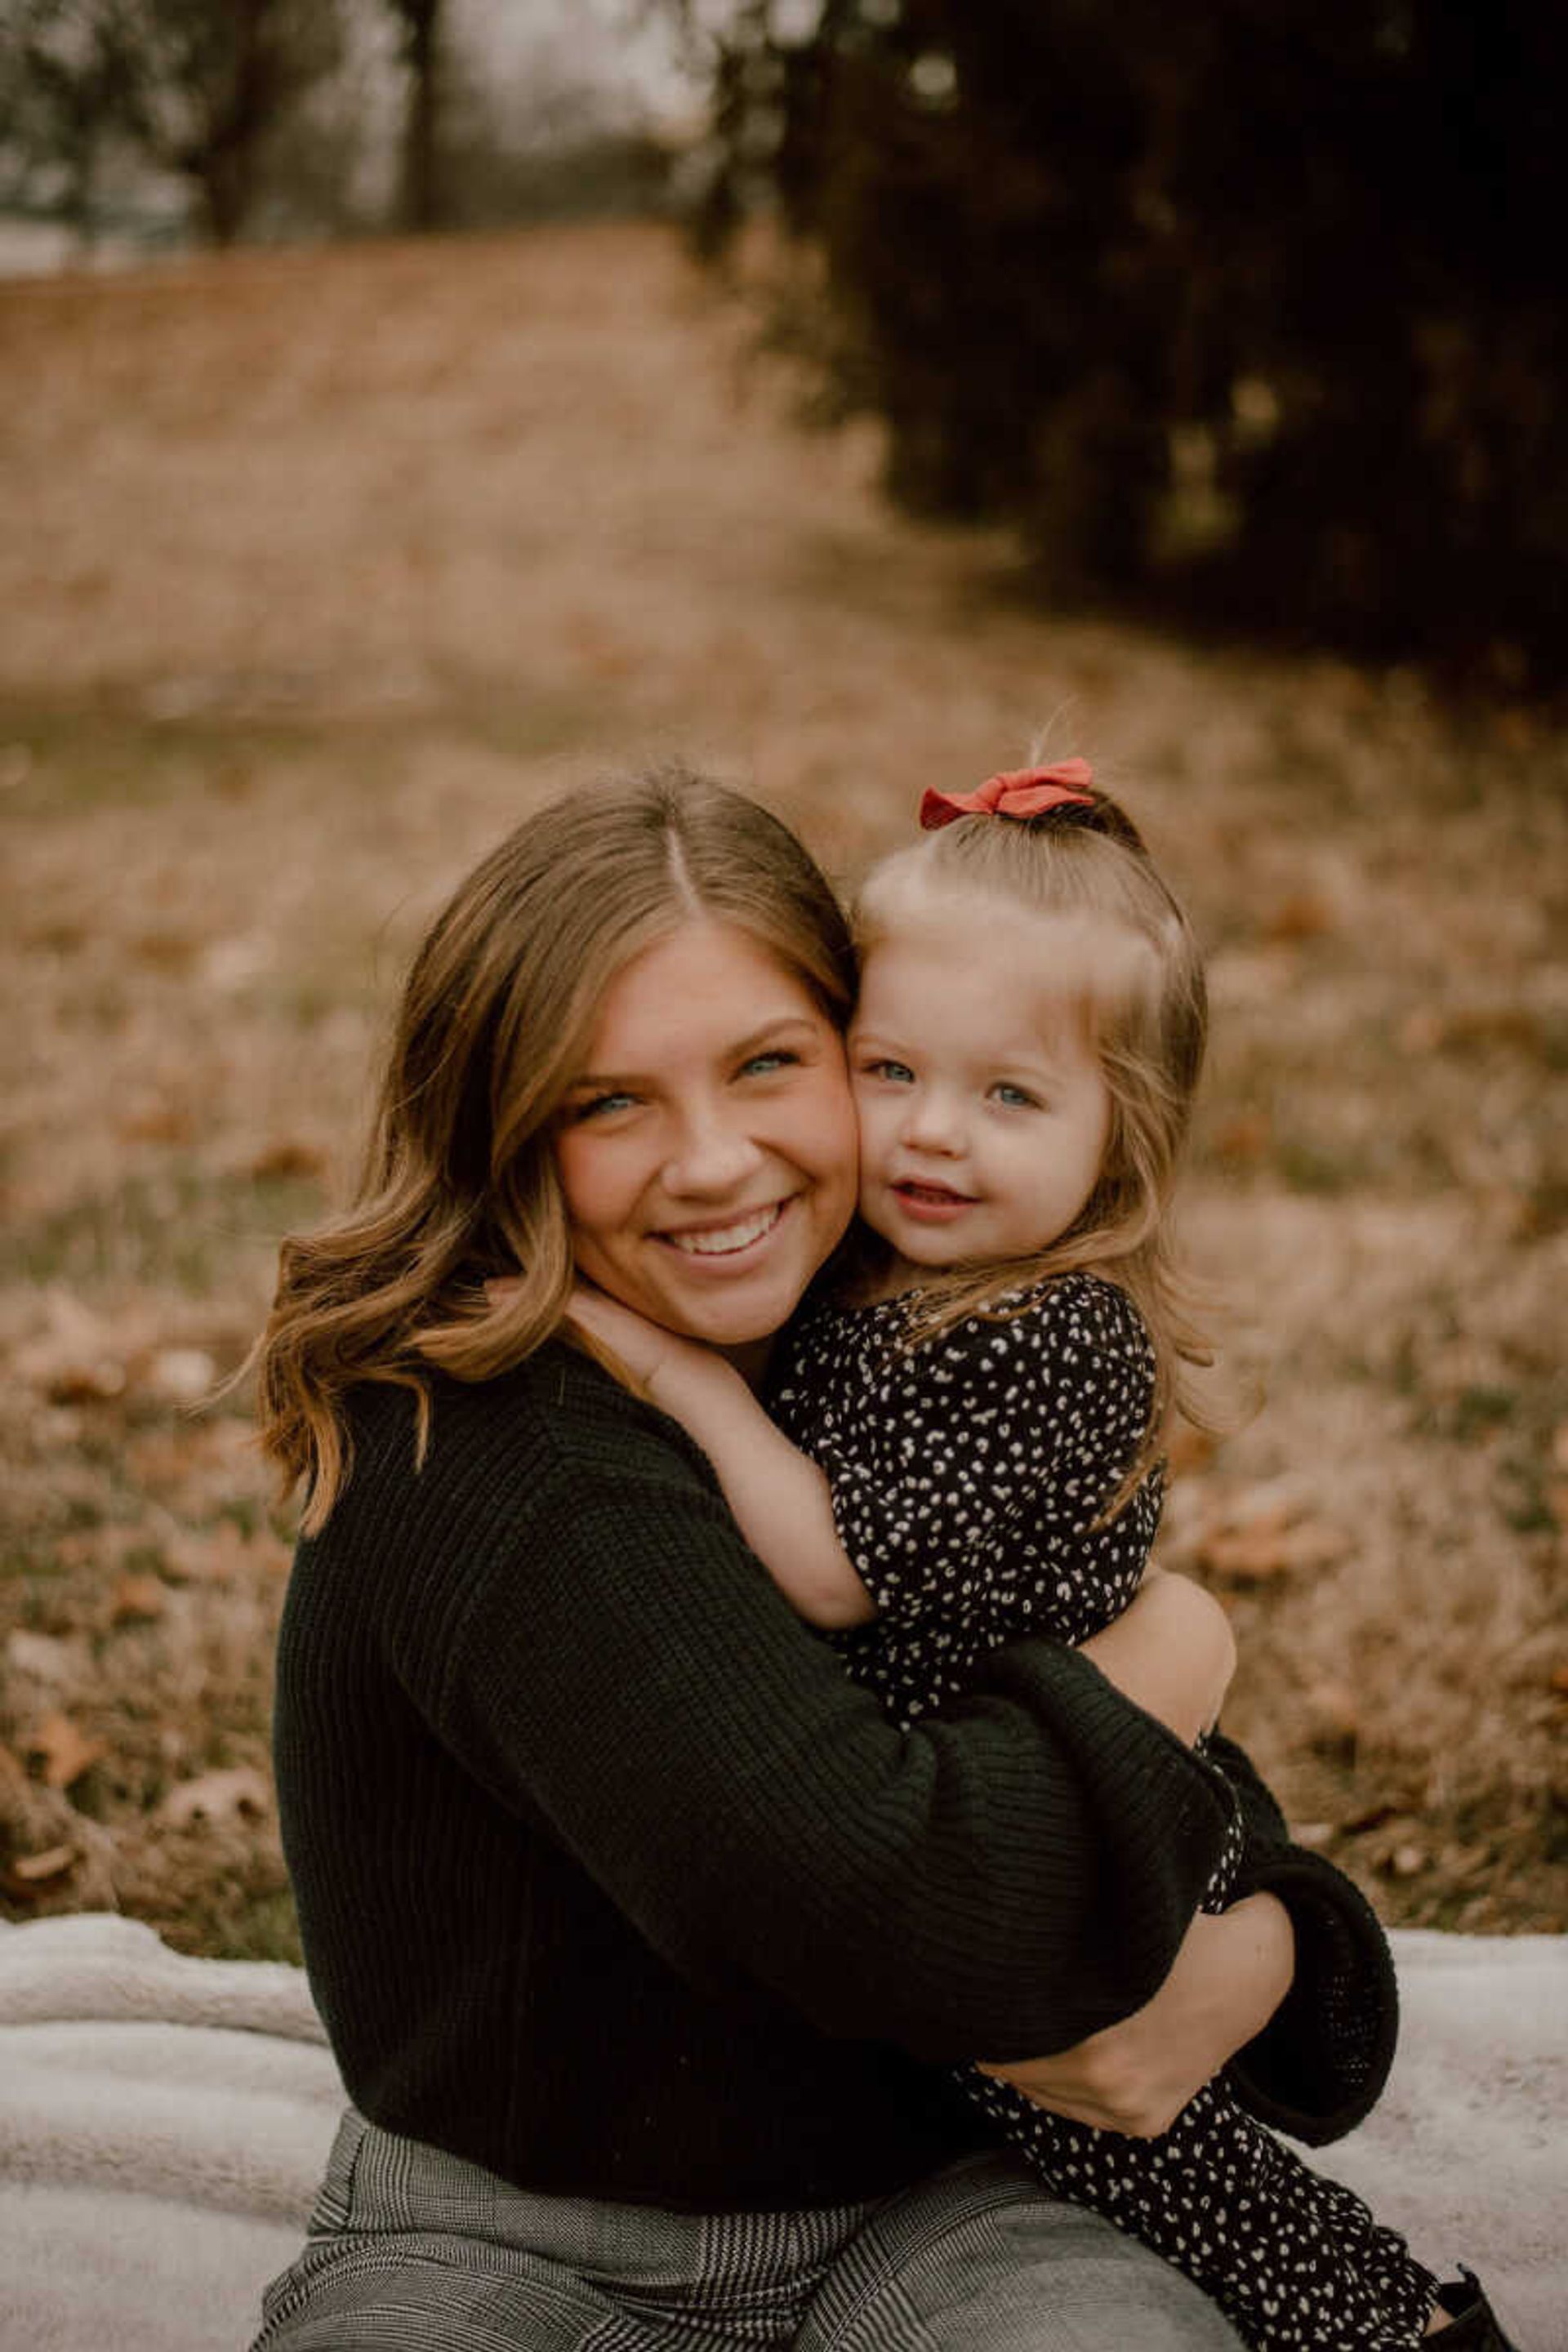 Senior sport management major Jaden Kight and her two-year-old daughter, Charlotte. 